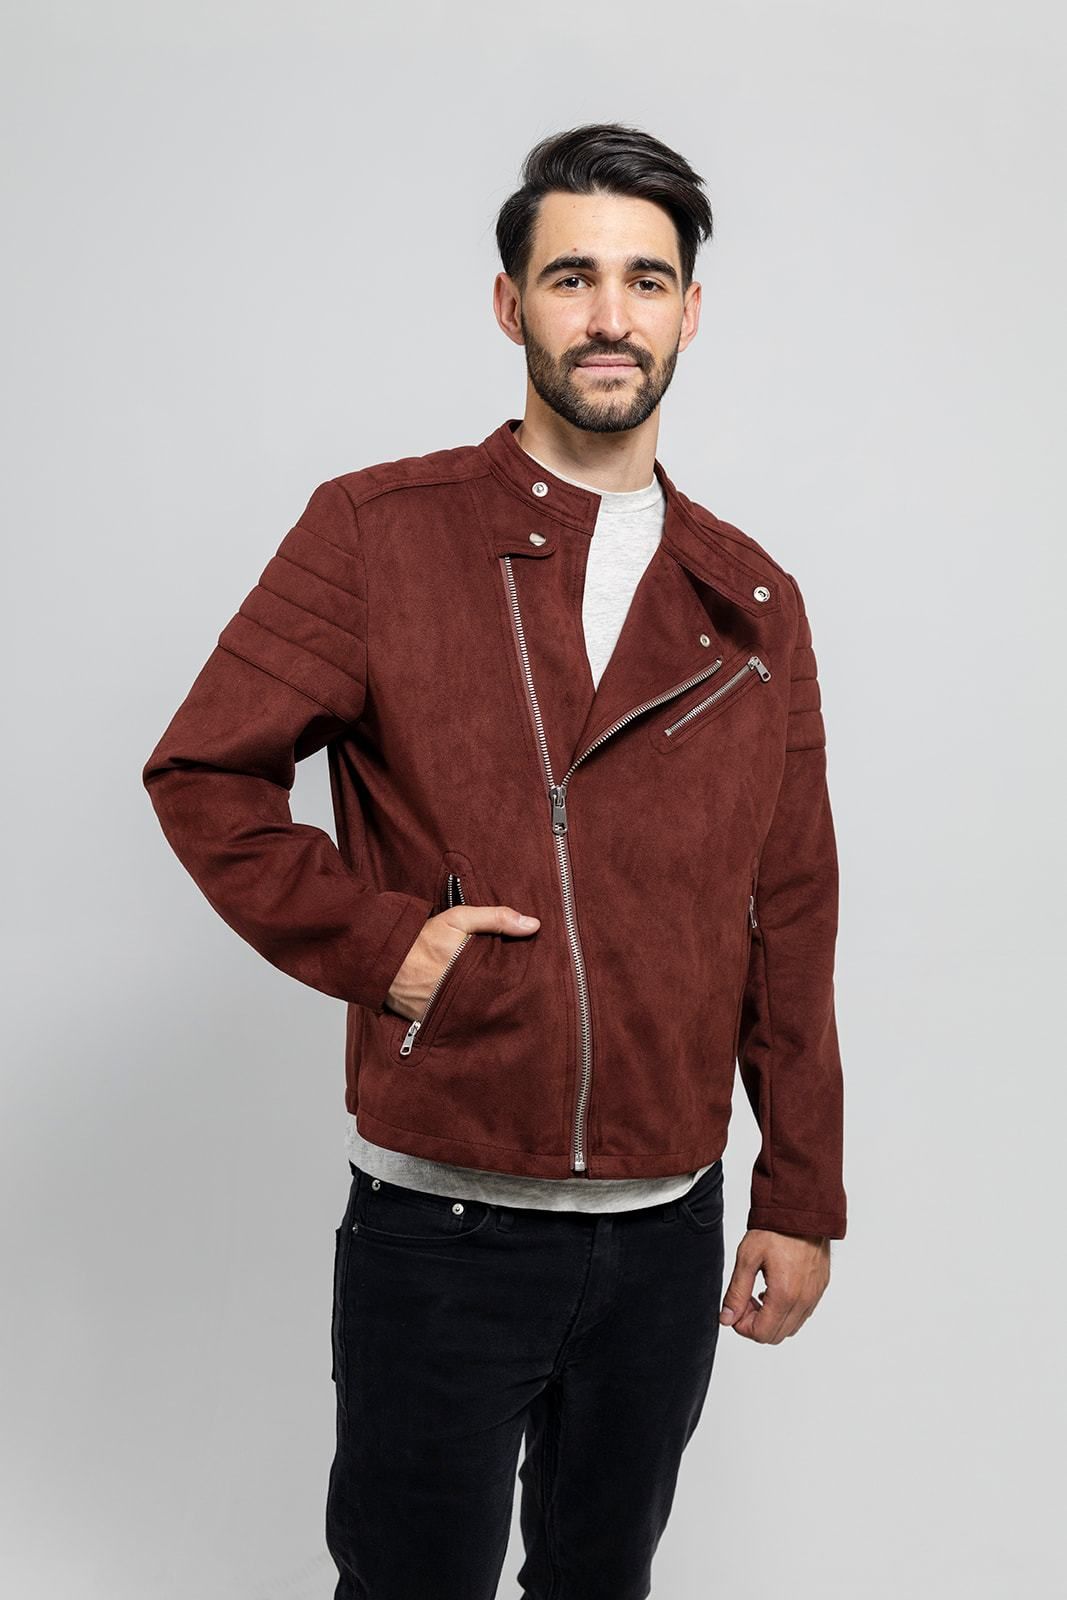 First Manufacturing Payton - Men's Faux Leather Jacket, Maroon